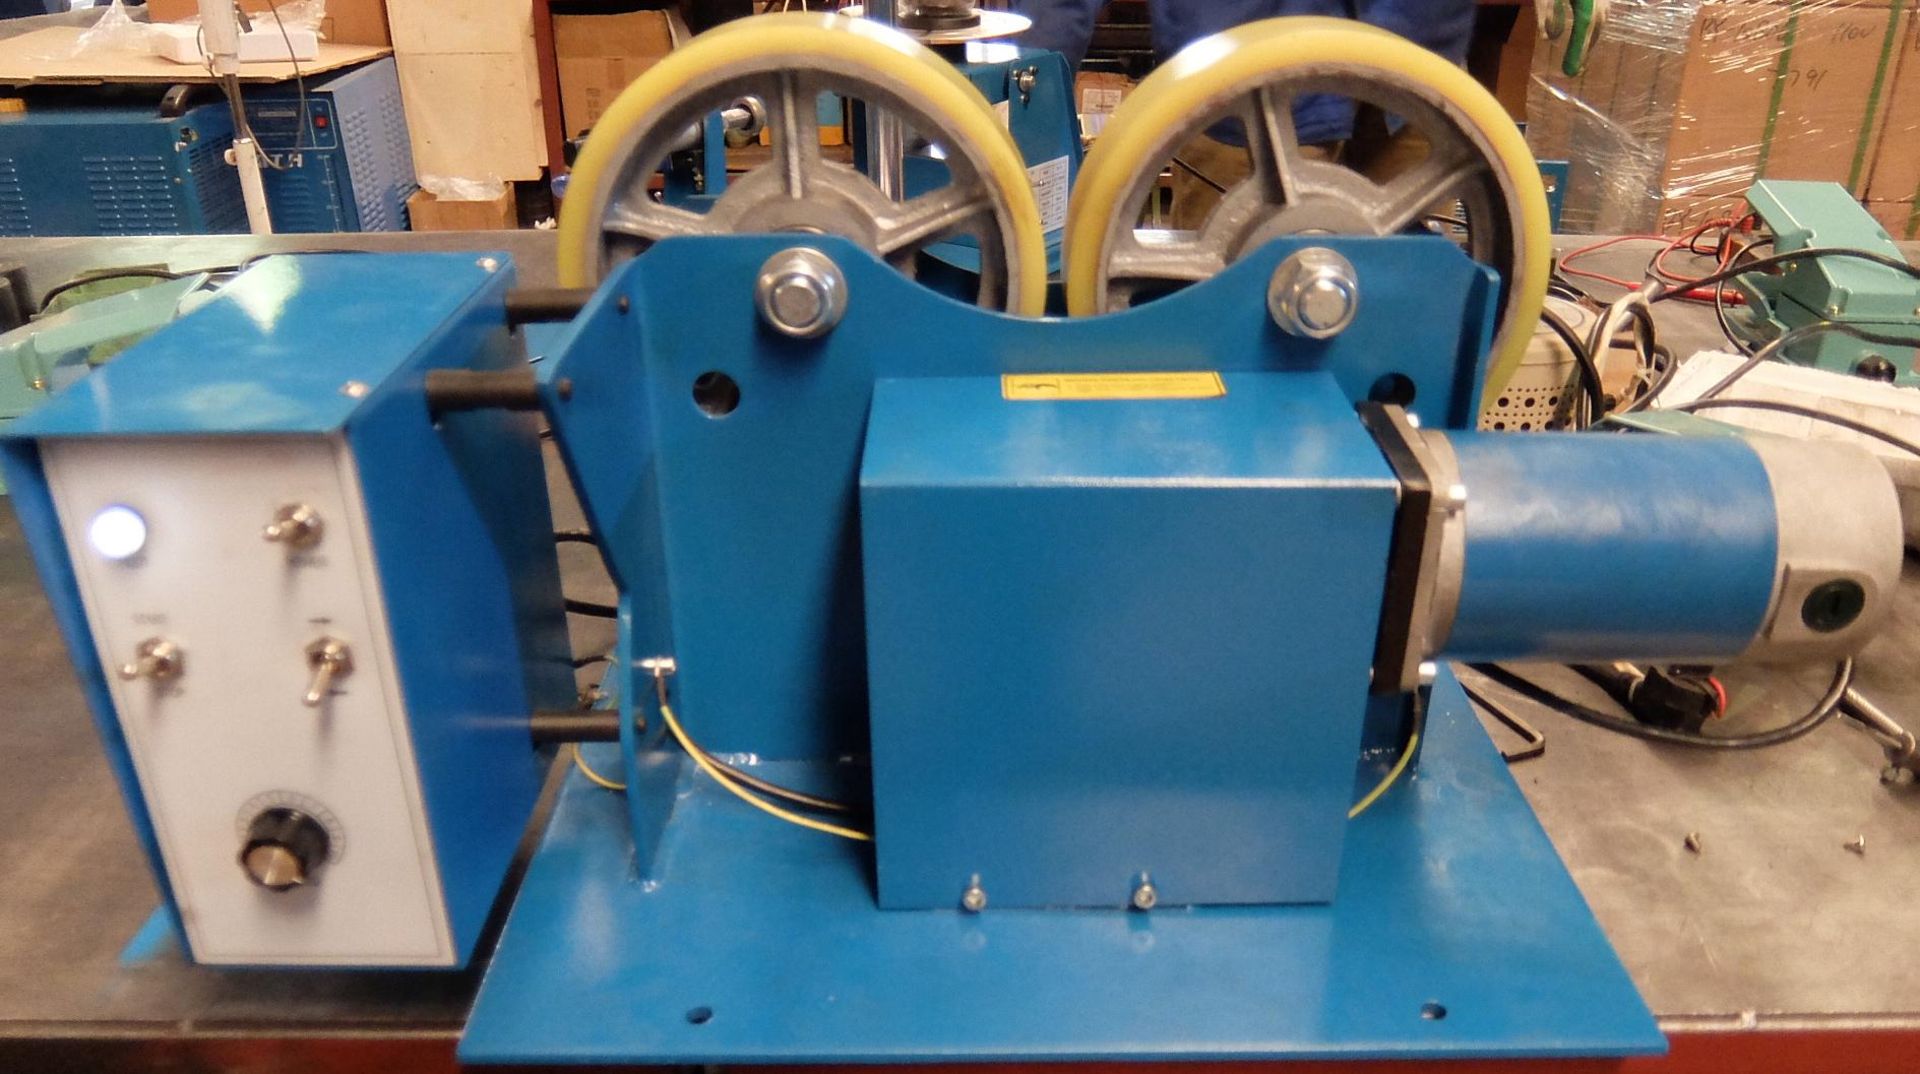 Mint Welding Tank turning rolls 2200lbs Capacity, variable speed controller, comes with power